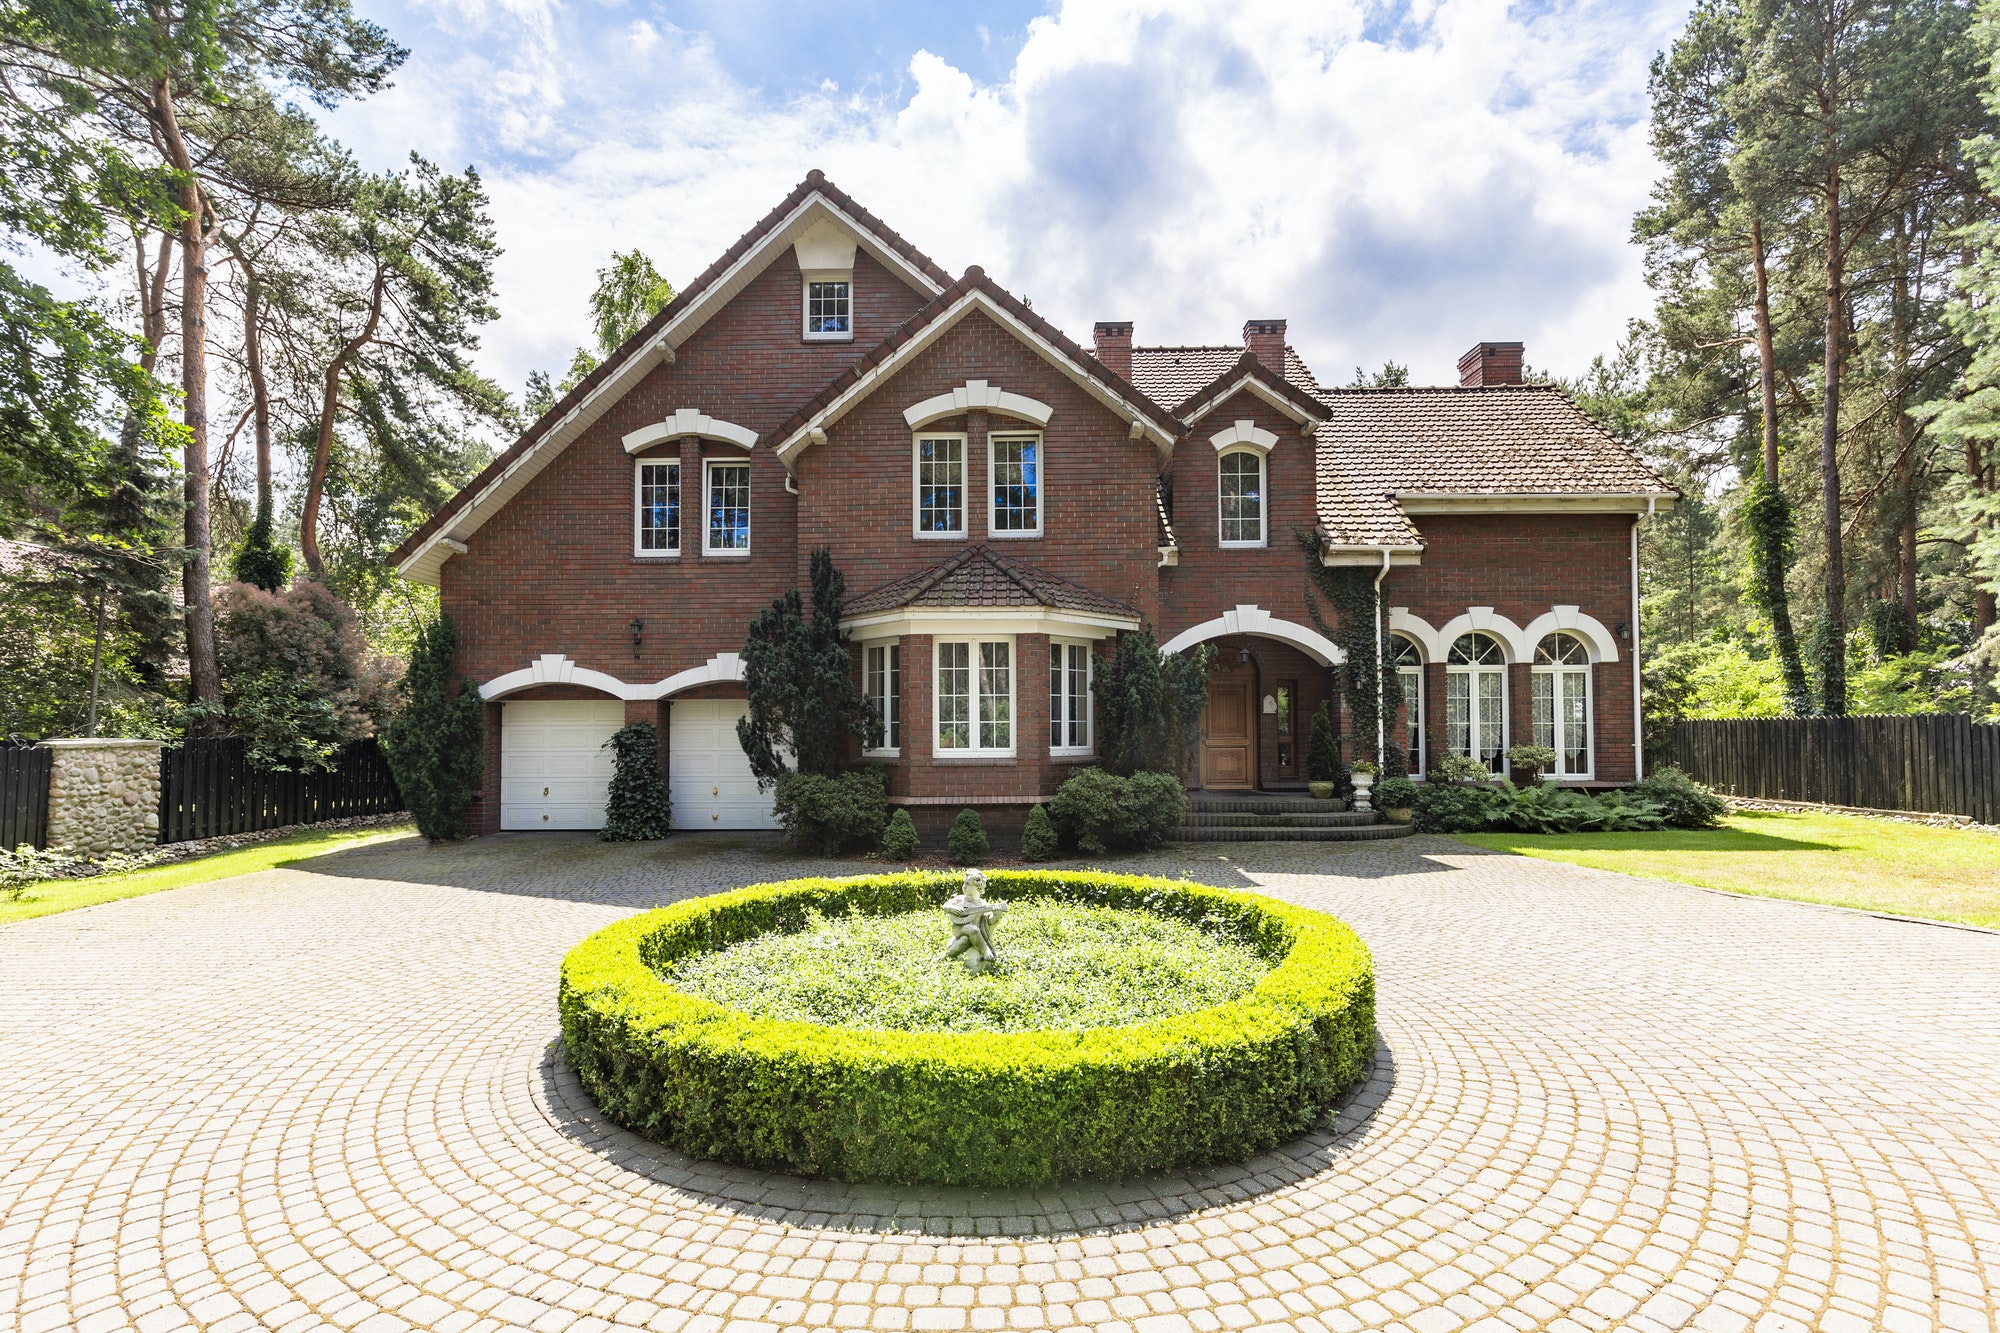 Front view of a driveway with a round garden and big, english st